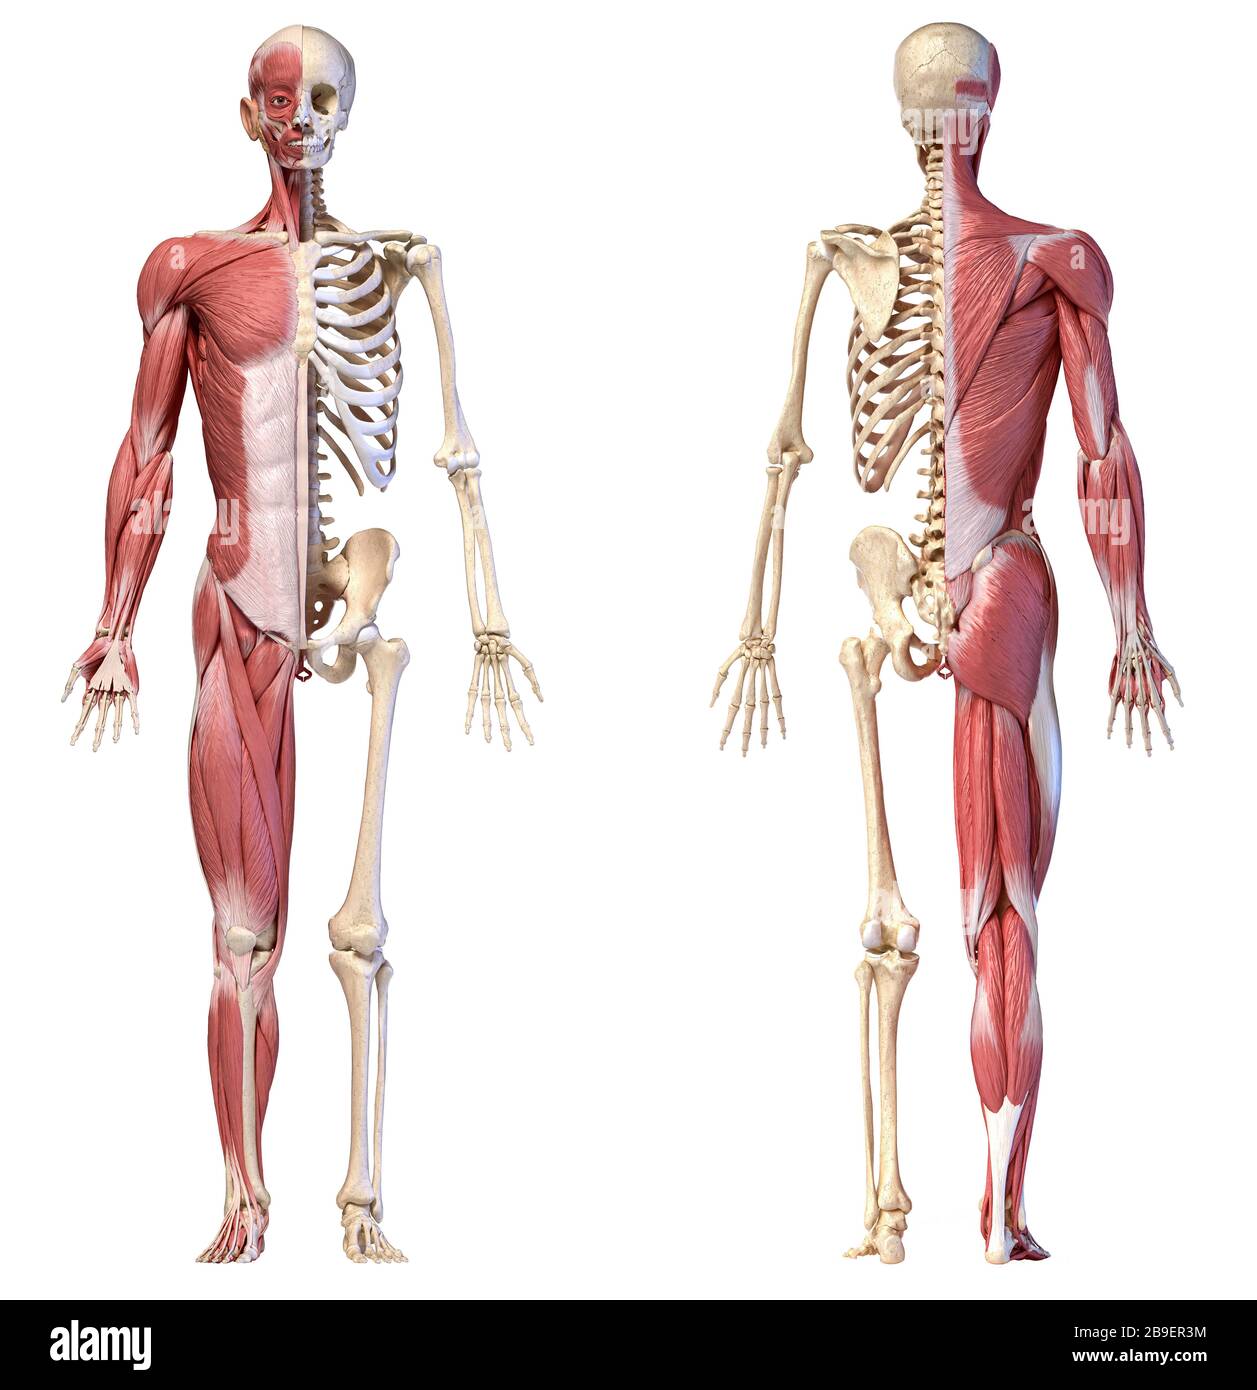 Anatomy of human male muscular and skeletal systems, front and rear views on white background. Stock Photo